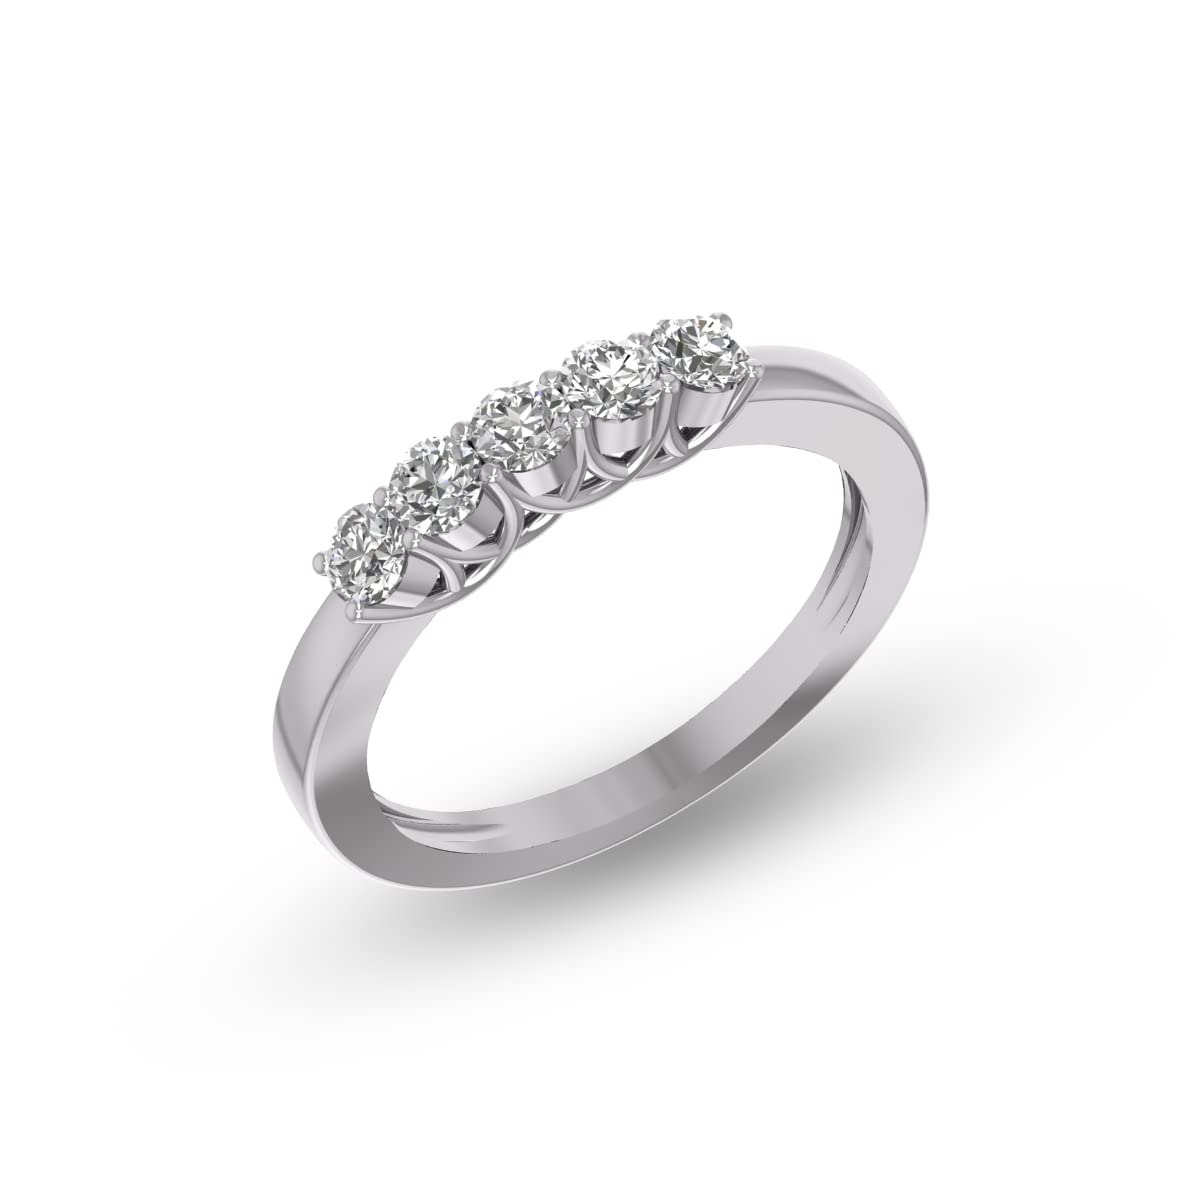 1/2 Carat TW Five Stone Natural Round Diamond Wedding Anniversary Band In 14k White Gold (J-K Color I2-I3 Clarity)